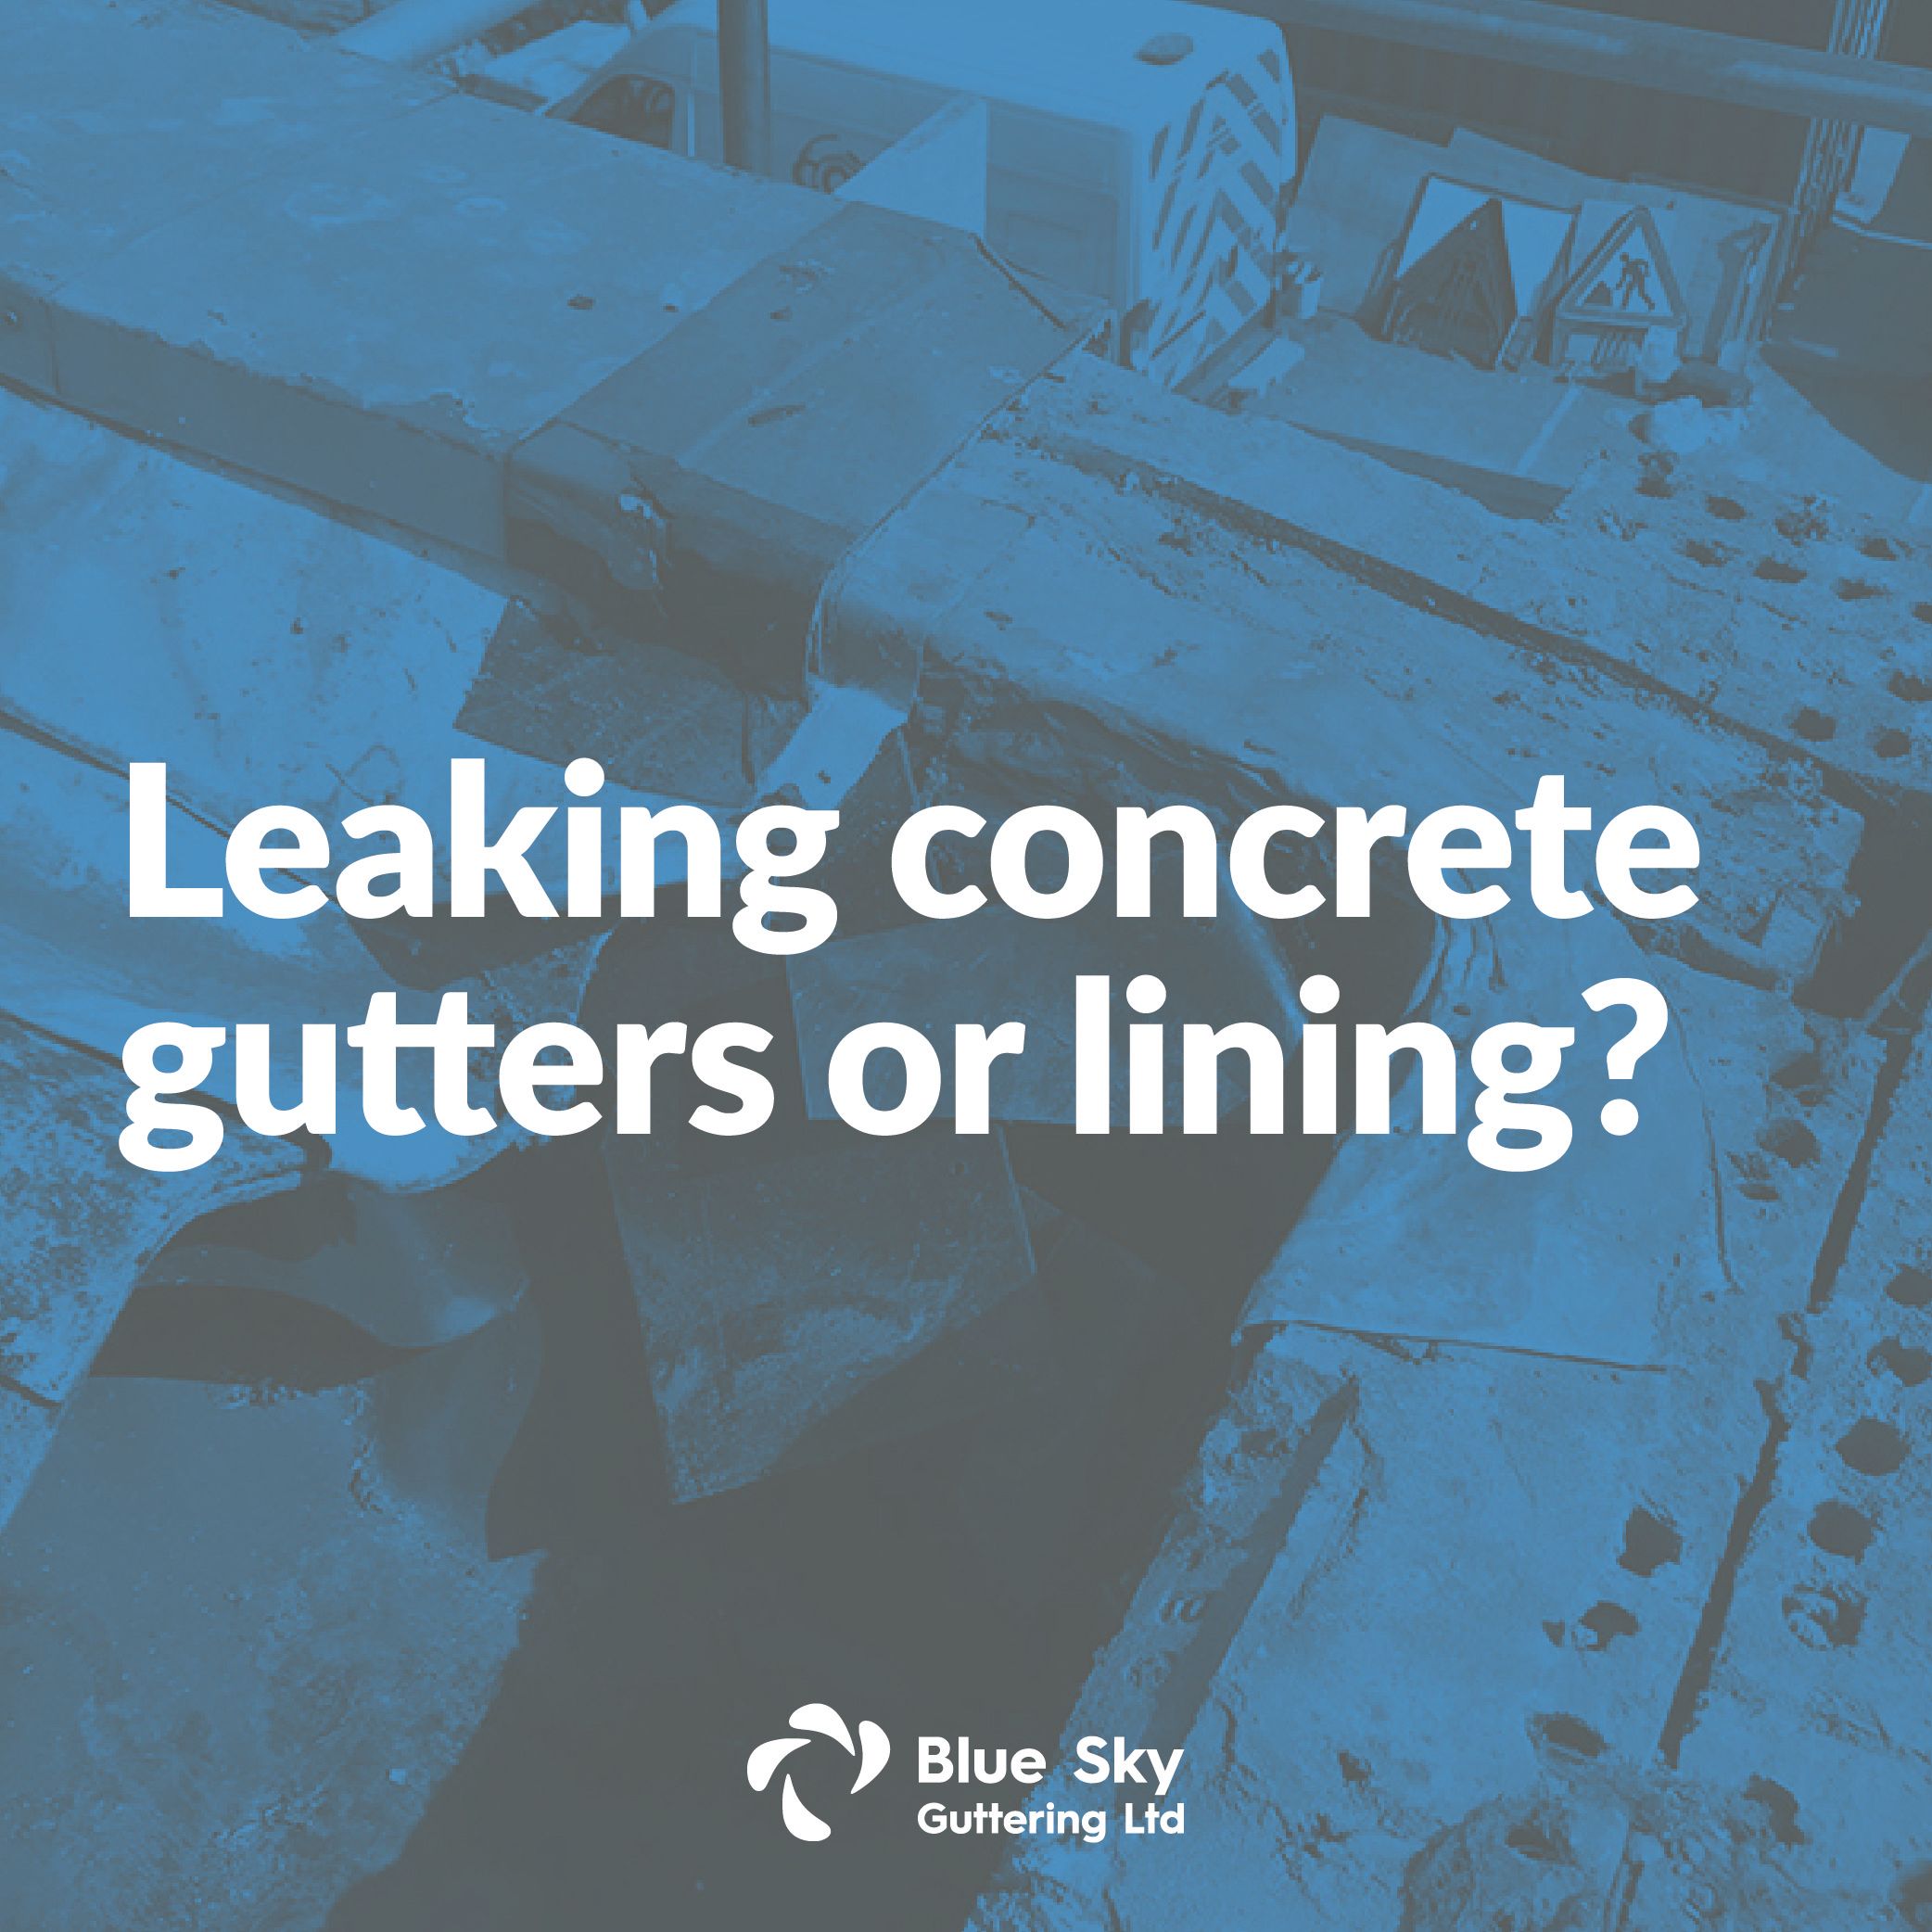 Leaking concrete gutters? We have a solution!